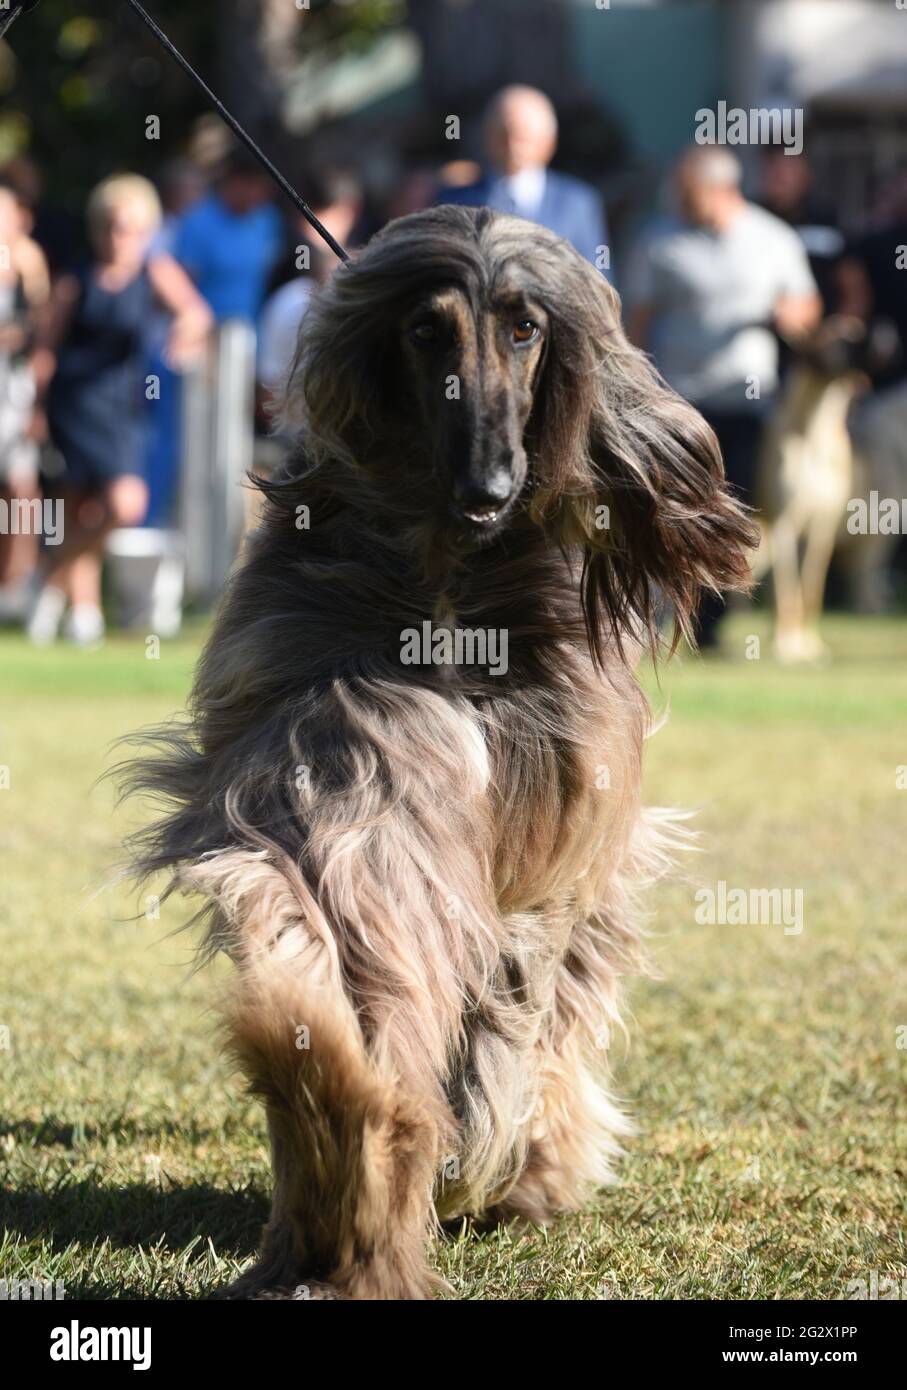 Afghan Hound at a dog show The Afghan Hound is a hound that is distinguished by its thick, fine, silky coat and its tail with a ring curl at the end. Stock Photo